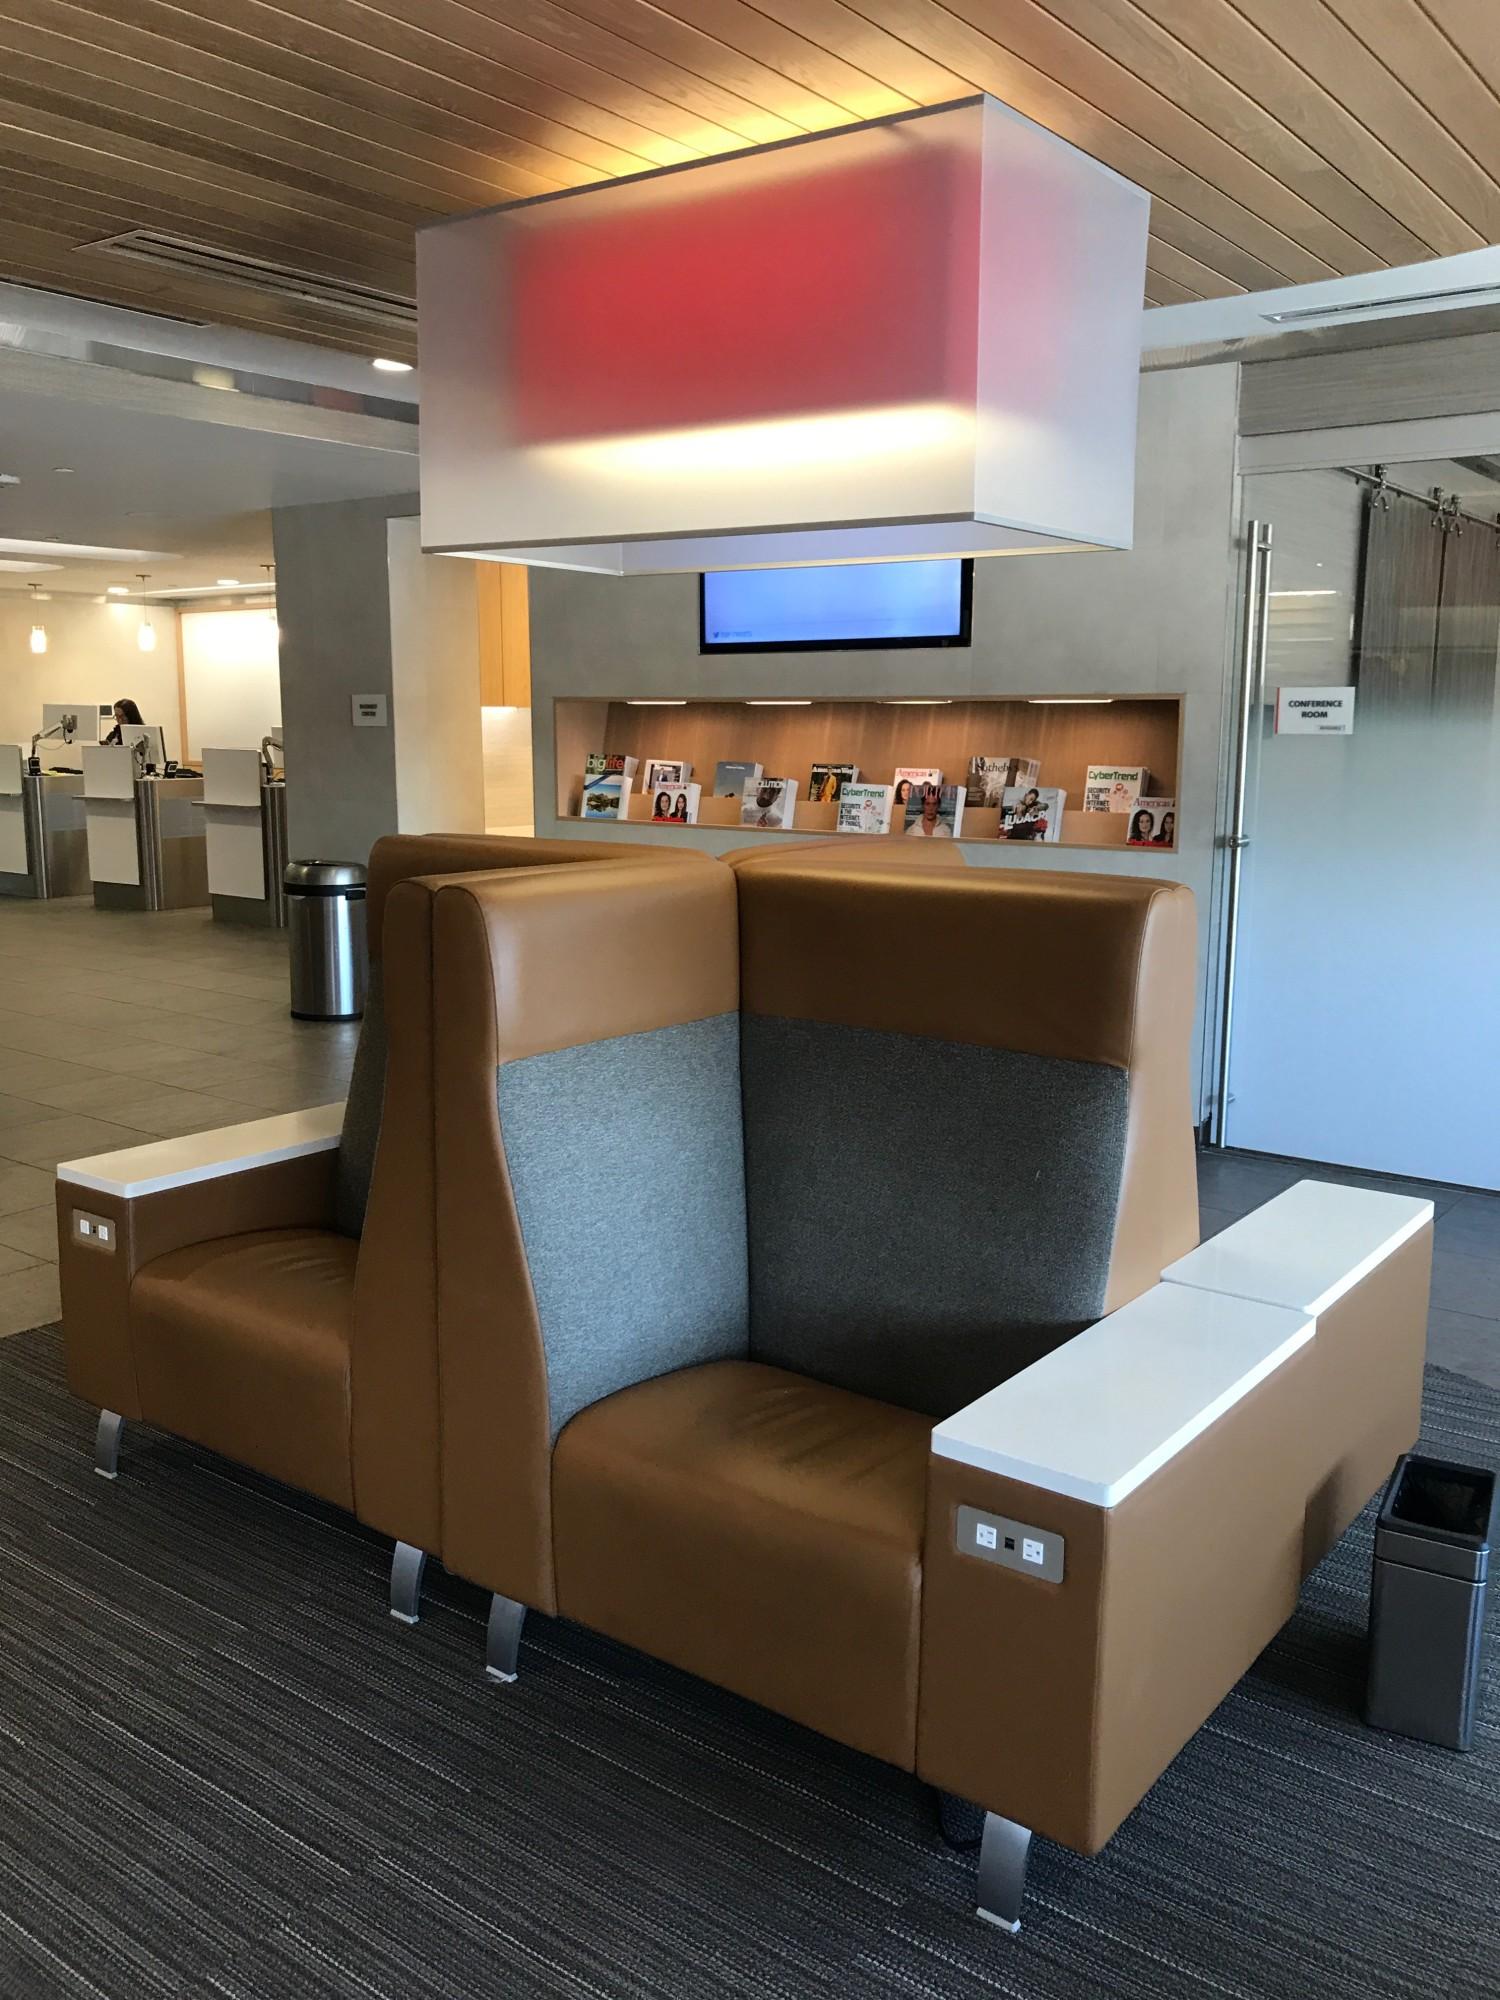 American Airlines Admirals Club (Gate A7) image 23 of 25